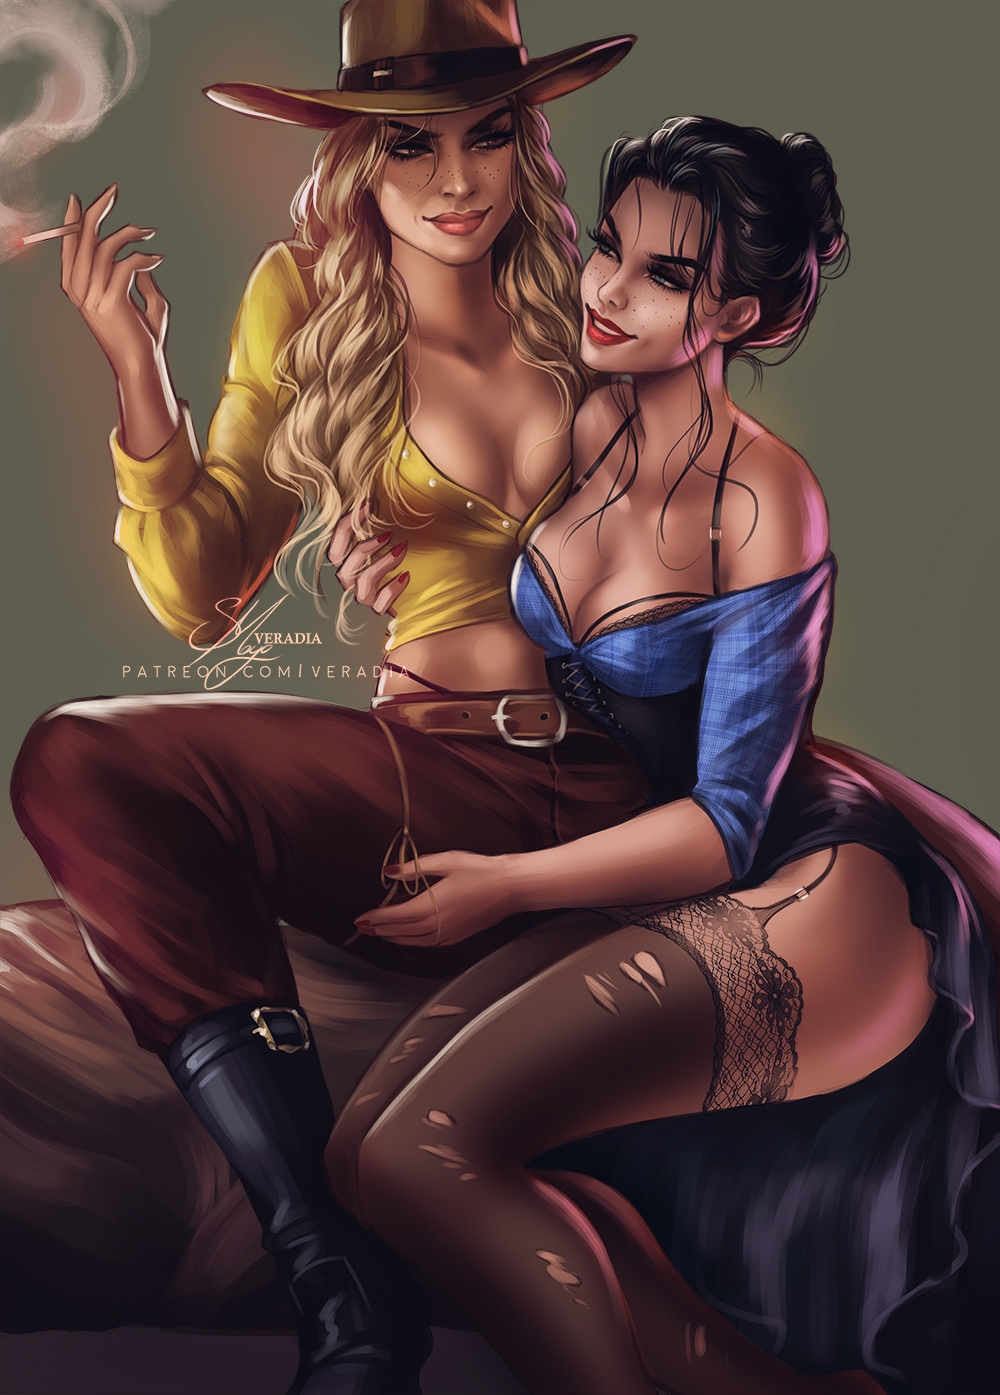 Sadie Adler & Abigail Marston Teasing Abigail Marston Abigail Roberts Abigail Red Dead Redemption 2 Red Dead Redemption 1 Red Dead Redemption Red Dead Revolver Sadie Adler Sadie 3d Porn 3d Girl 3dnsfw Natural Tits Panties Clothing Partially_clothed Clothed Lightly Clothed Big Ass Black Hair Female Only Female Focus Female Breasts Big Breasts Ass Blonde Cowgirl Outfit Cowgirl Smoking Cigarette Smoke Prostitute 2 Girls 2girls Dressed Ripped Clothes Torn Clothes Pinup Pinupgirl Long Hair Girlongirl Long Socks Long Boots Long Legs Hair Bun Cowboy Hat Boots Blue Eyes Brown Eyes